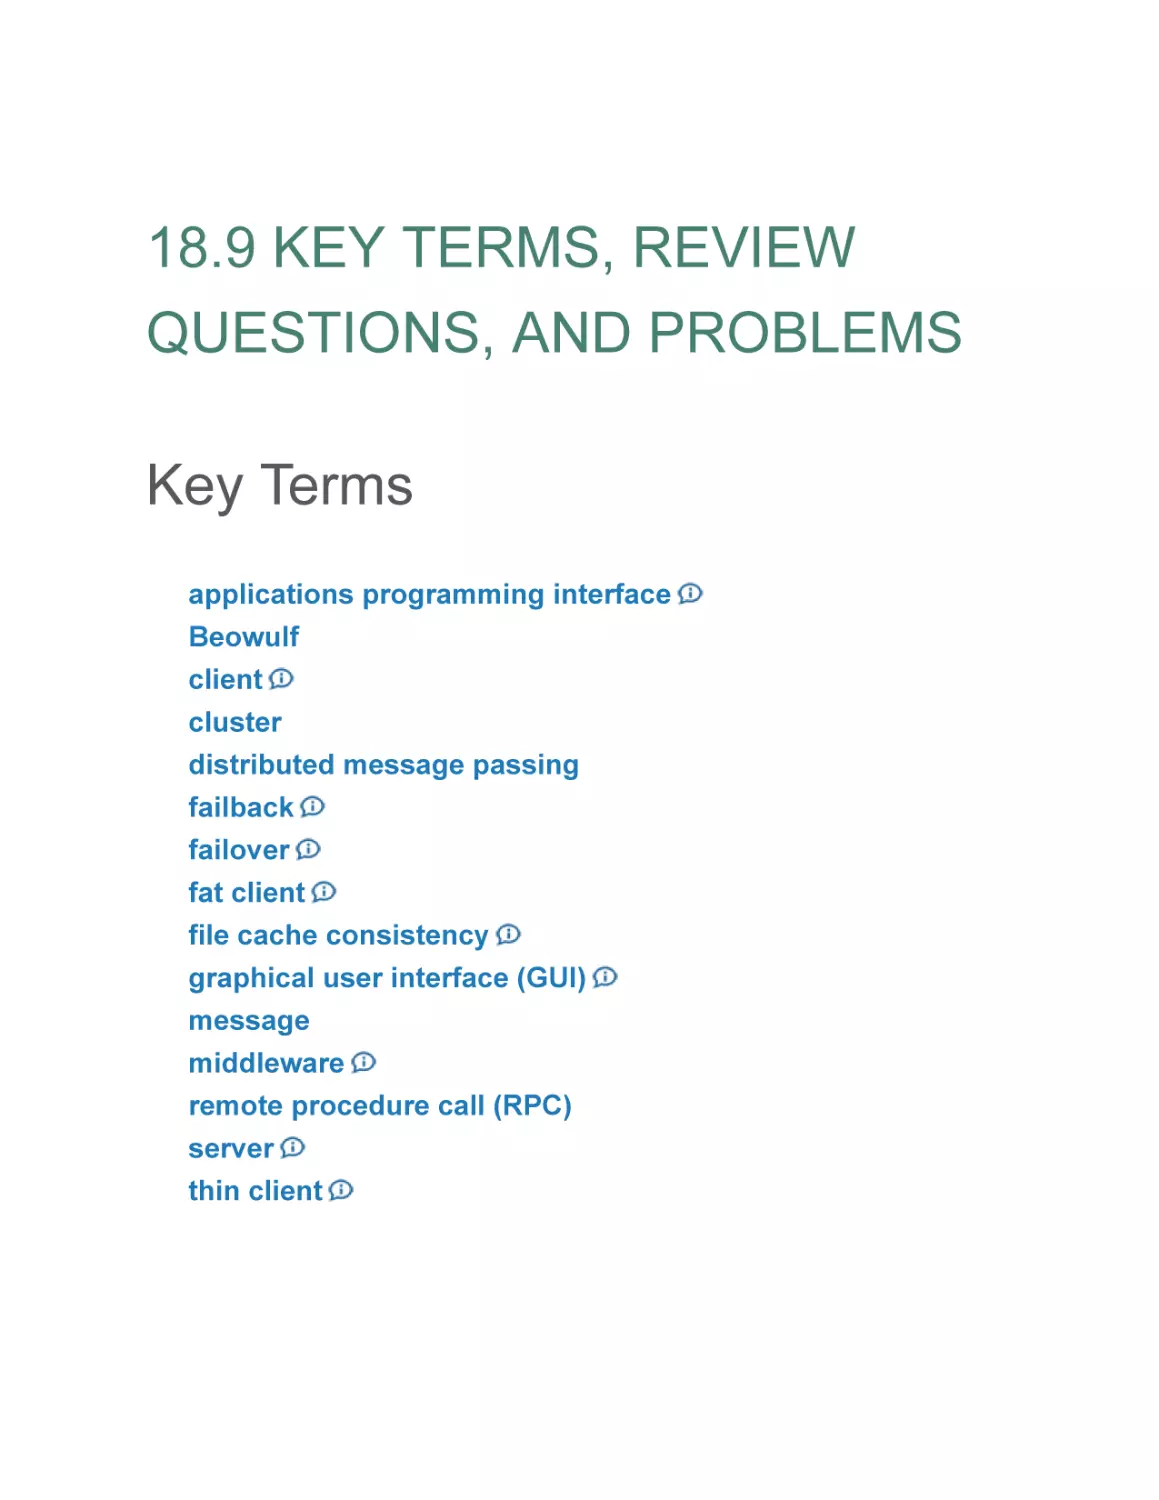 18.9 KEY TERMS, REVIEW QUESTIONS, AND PROBLEMS
Key Terms